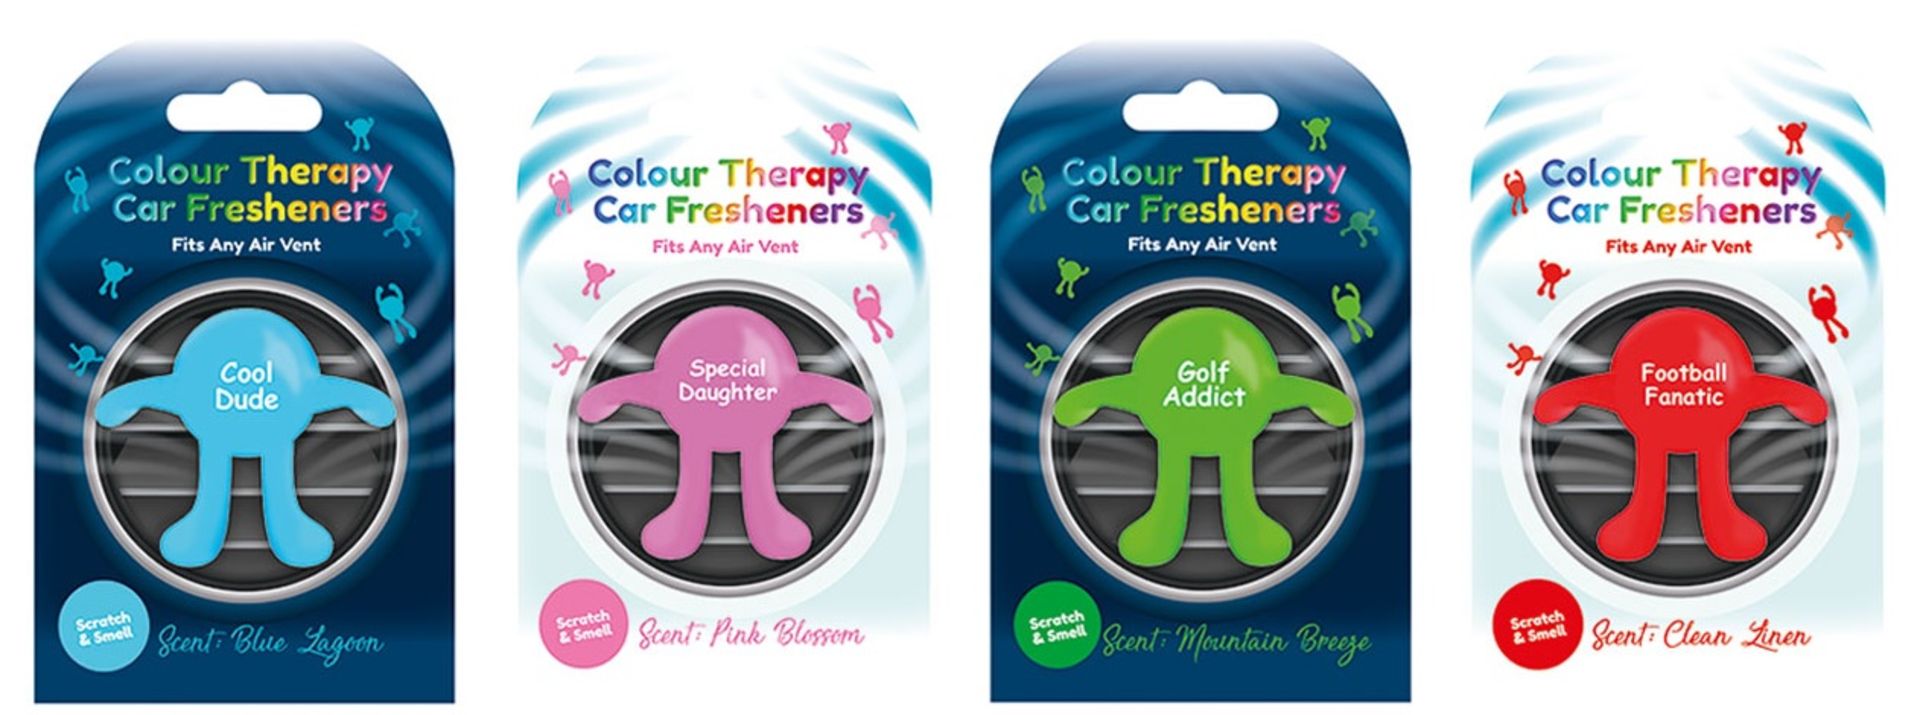 64 x Colour Therapy Car Air Fresheners